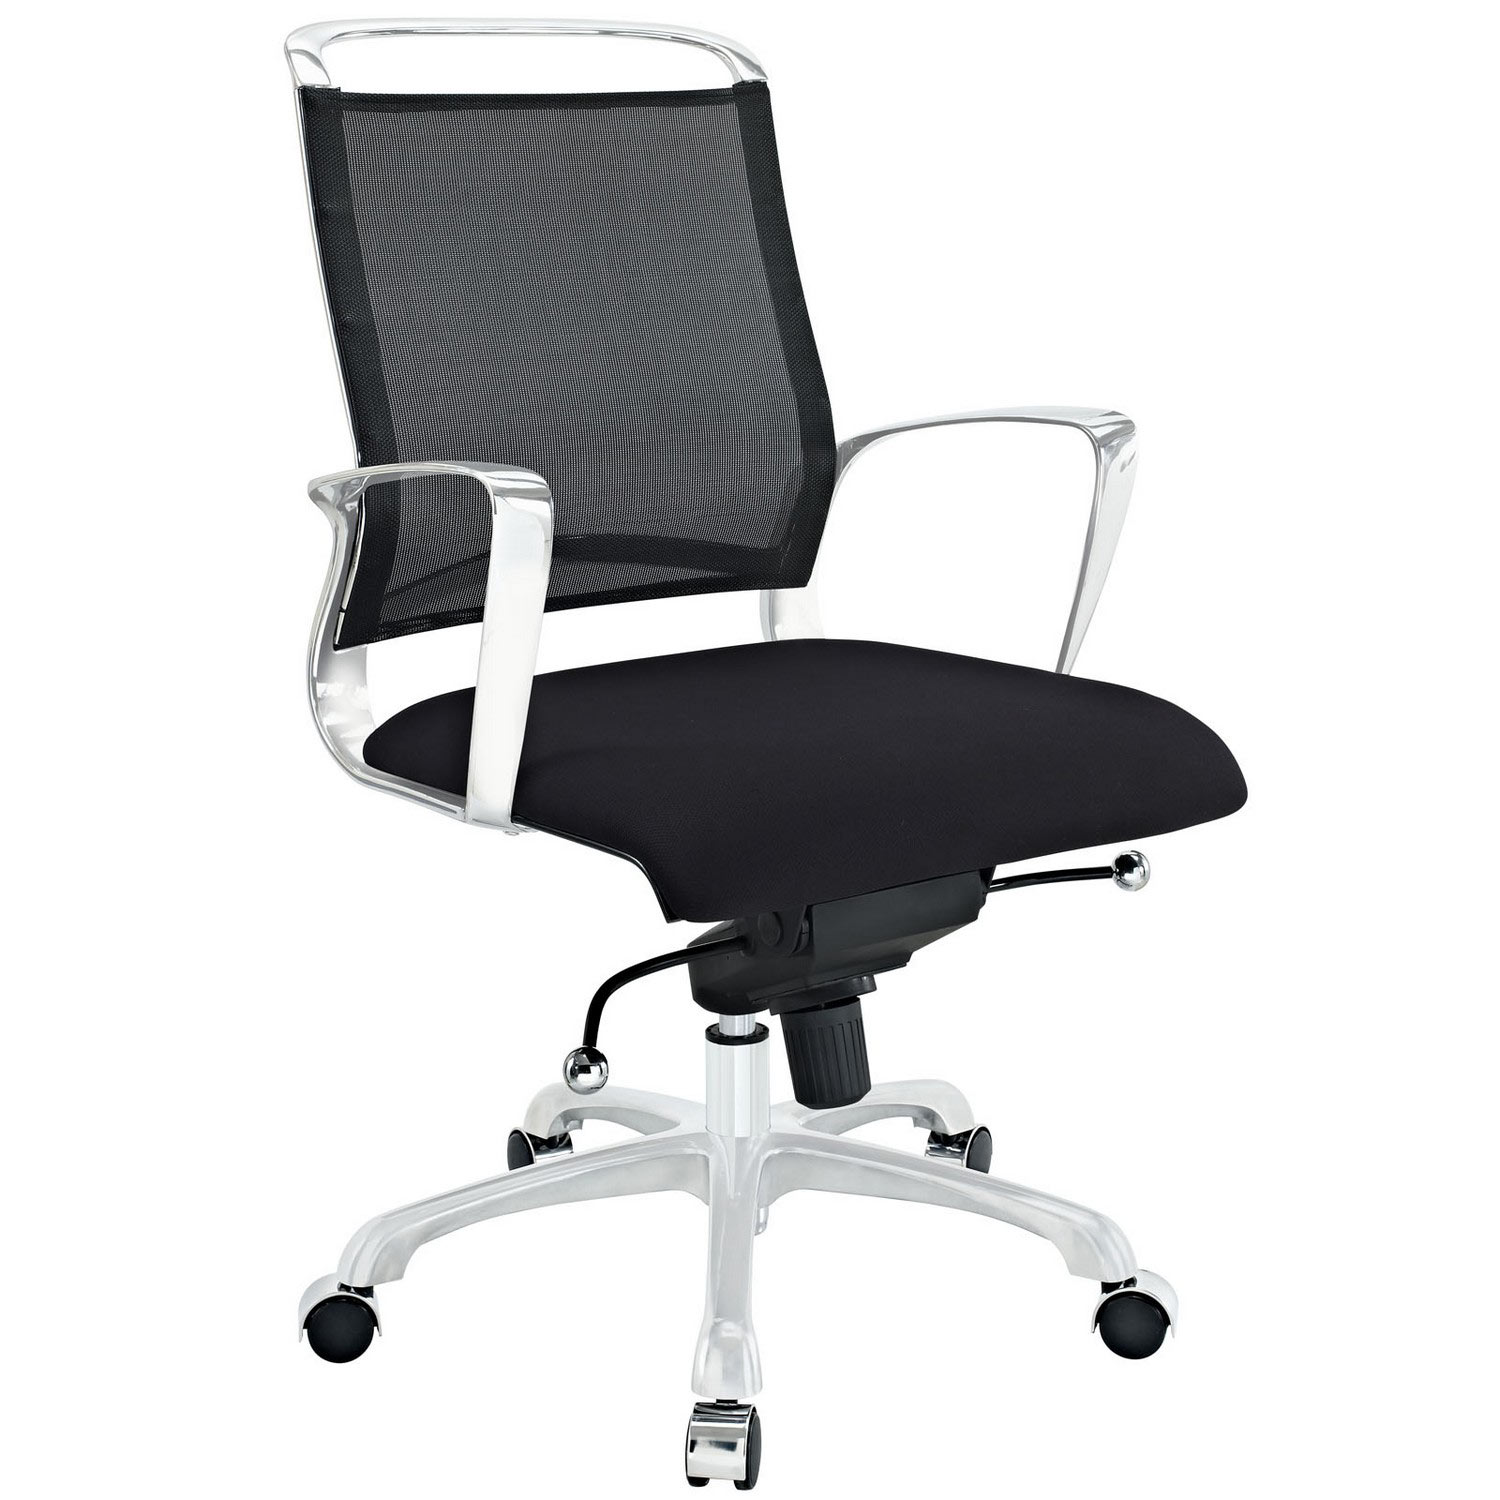 Modway Strive Mid Back Office Chair - Black